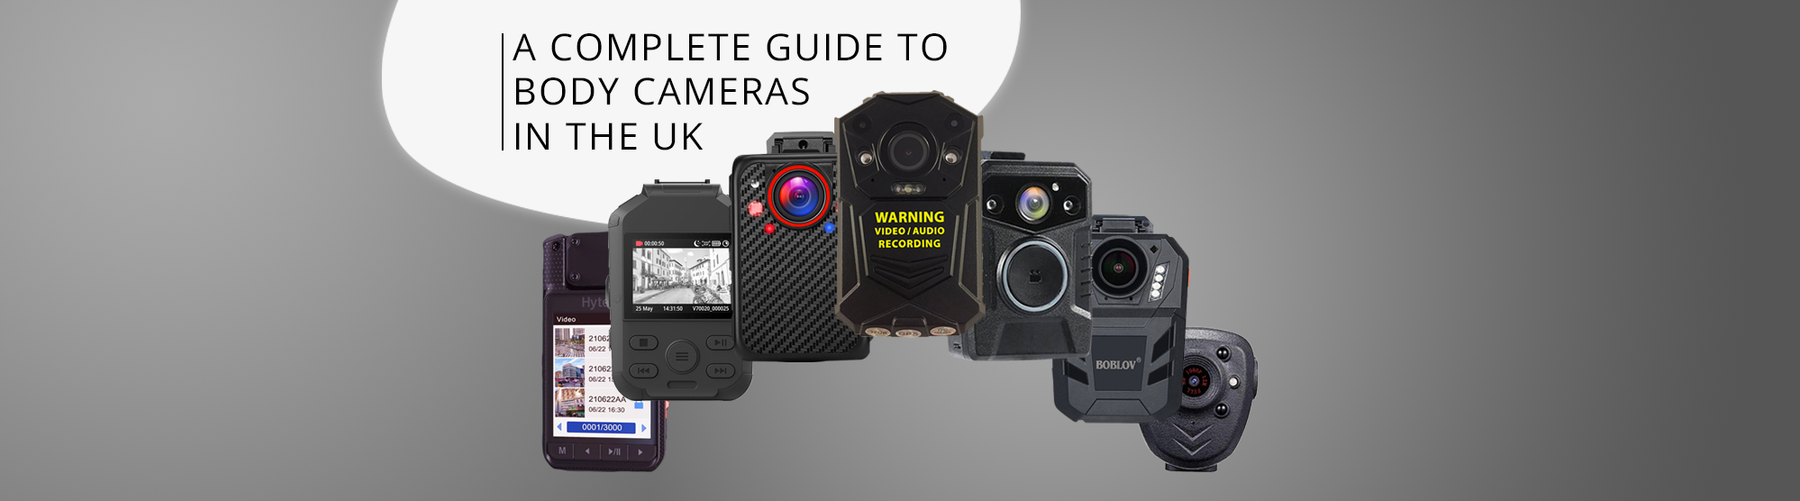 A complete guide to Body Cameras in the UK